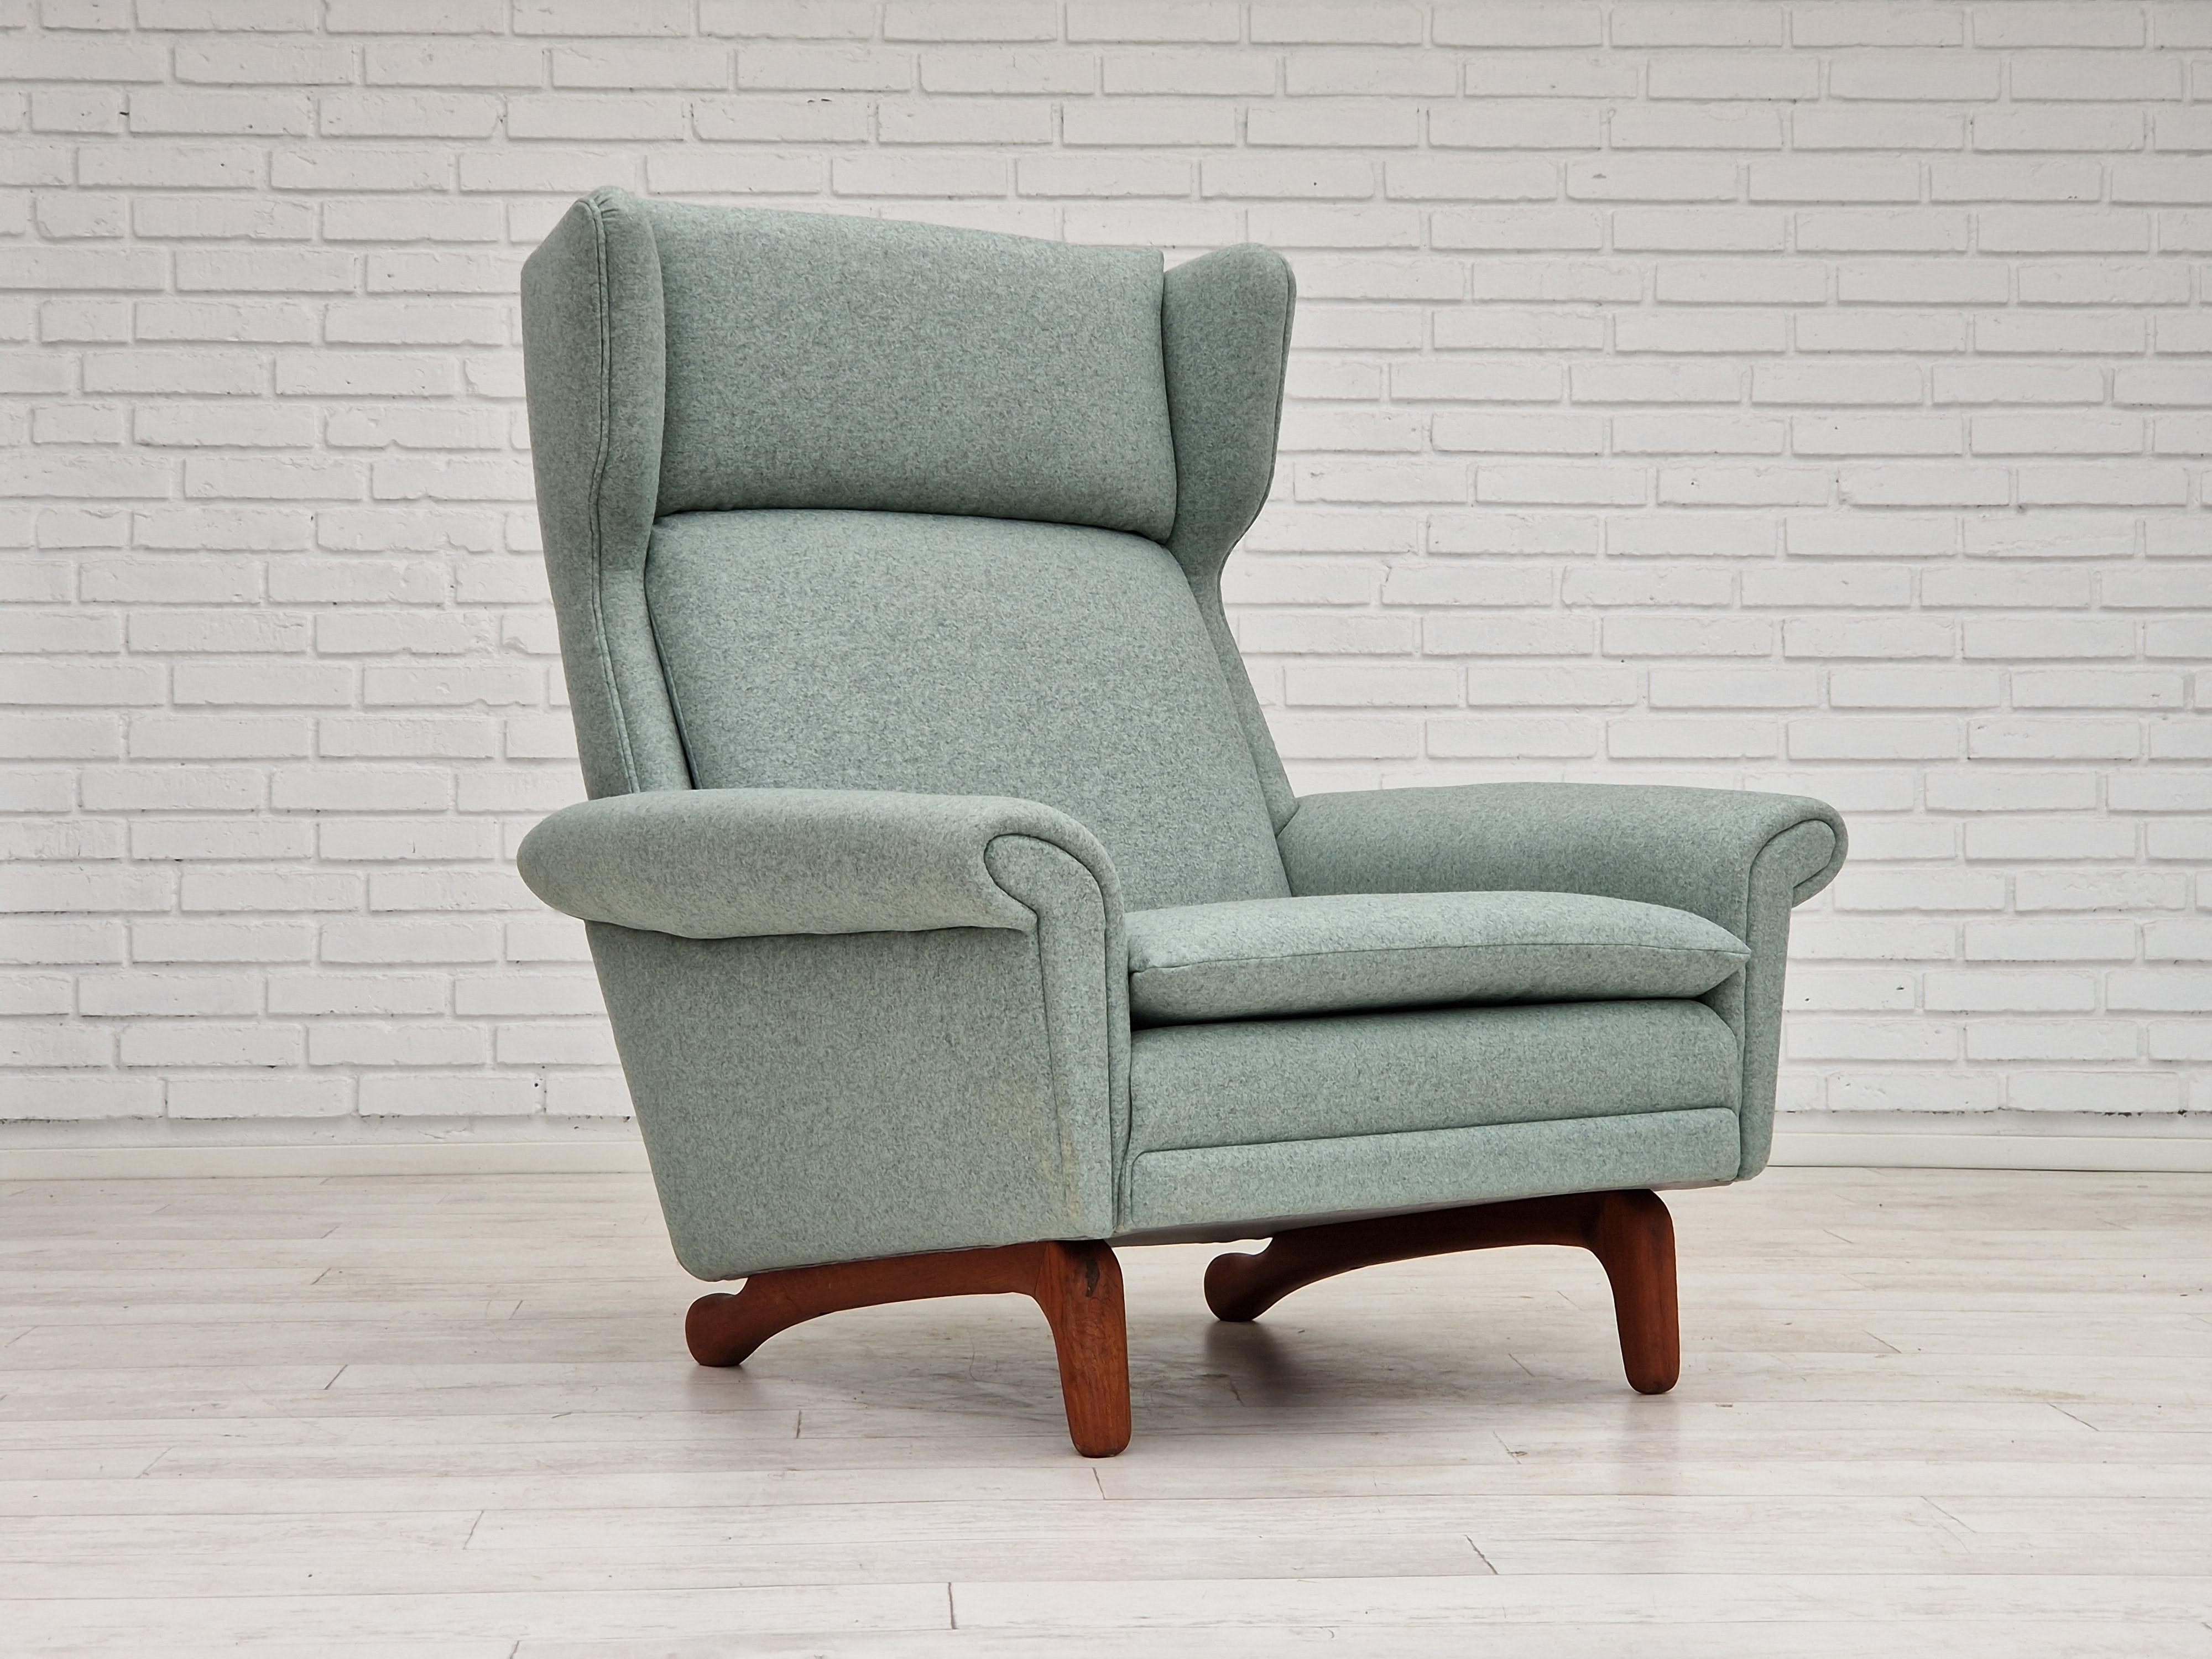 1970s, Danish Design by Aage Christiansen for Eran Møbler, Restored Armchair In Good Condition For Sale In Tarm, 82